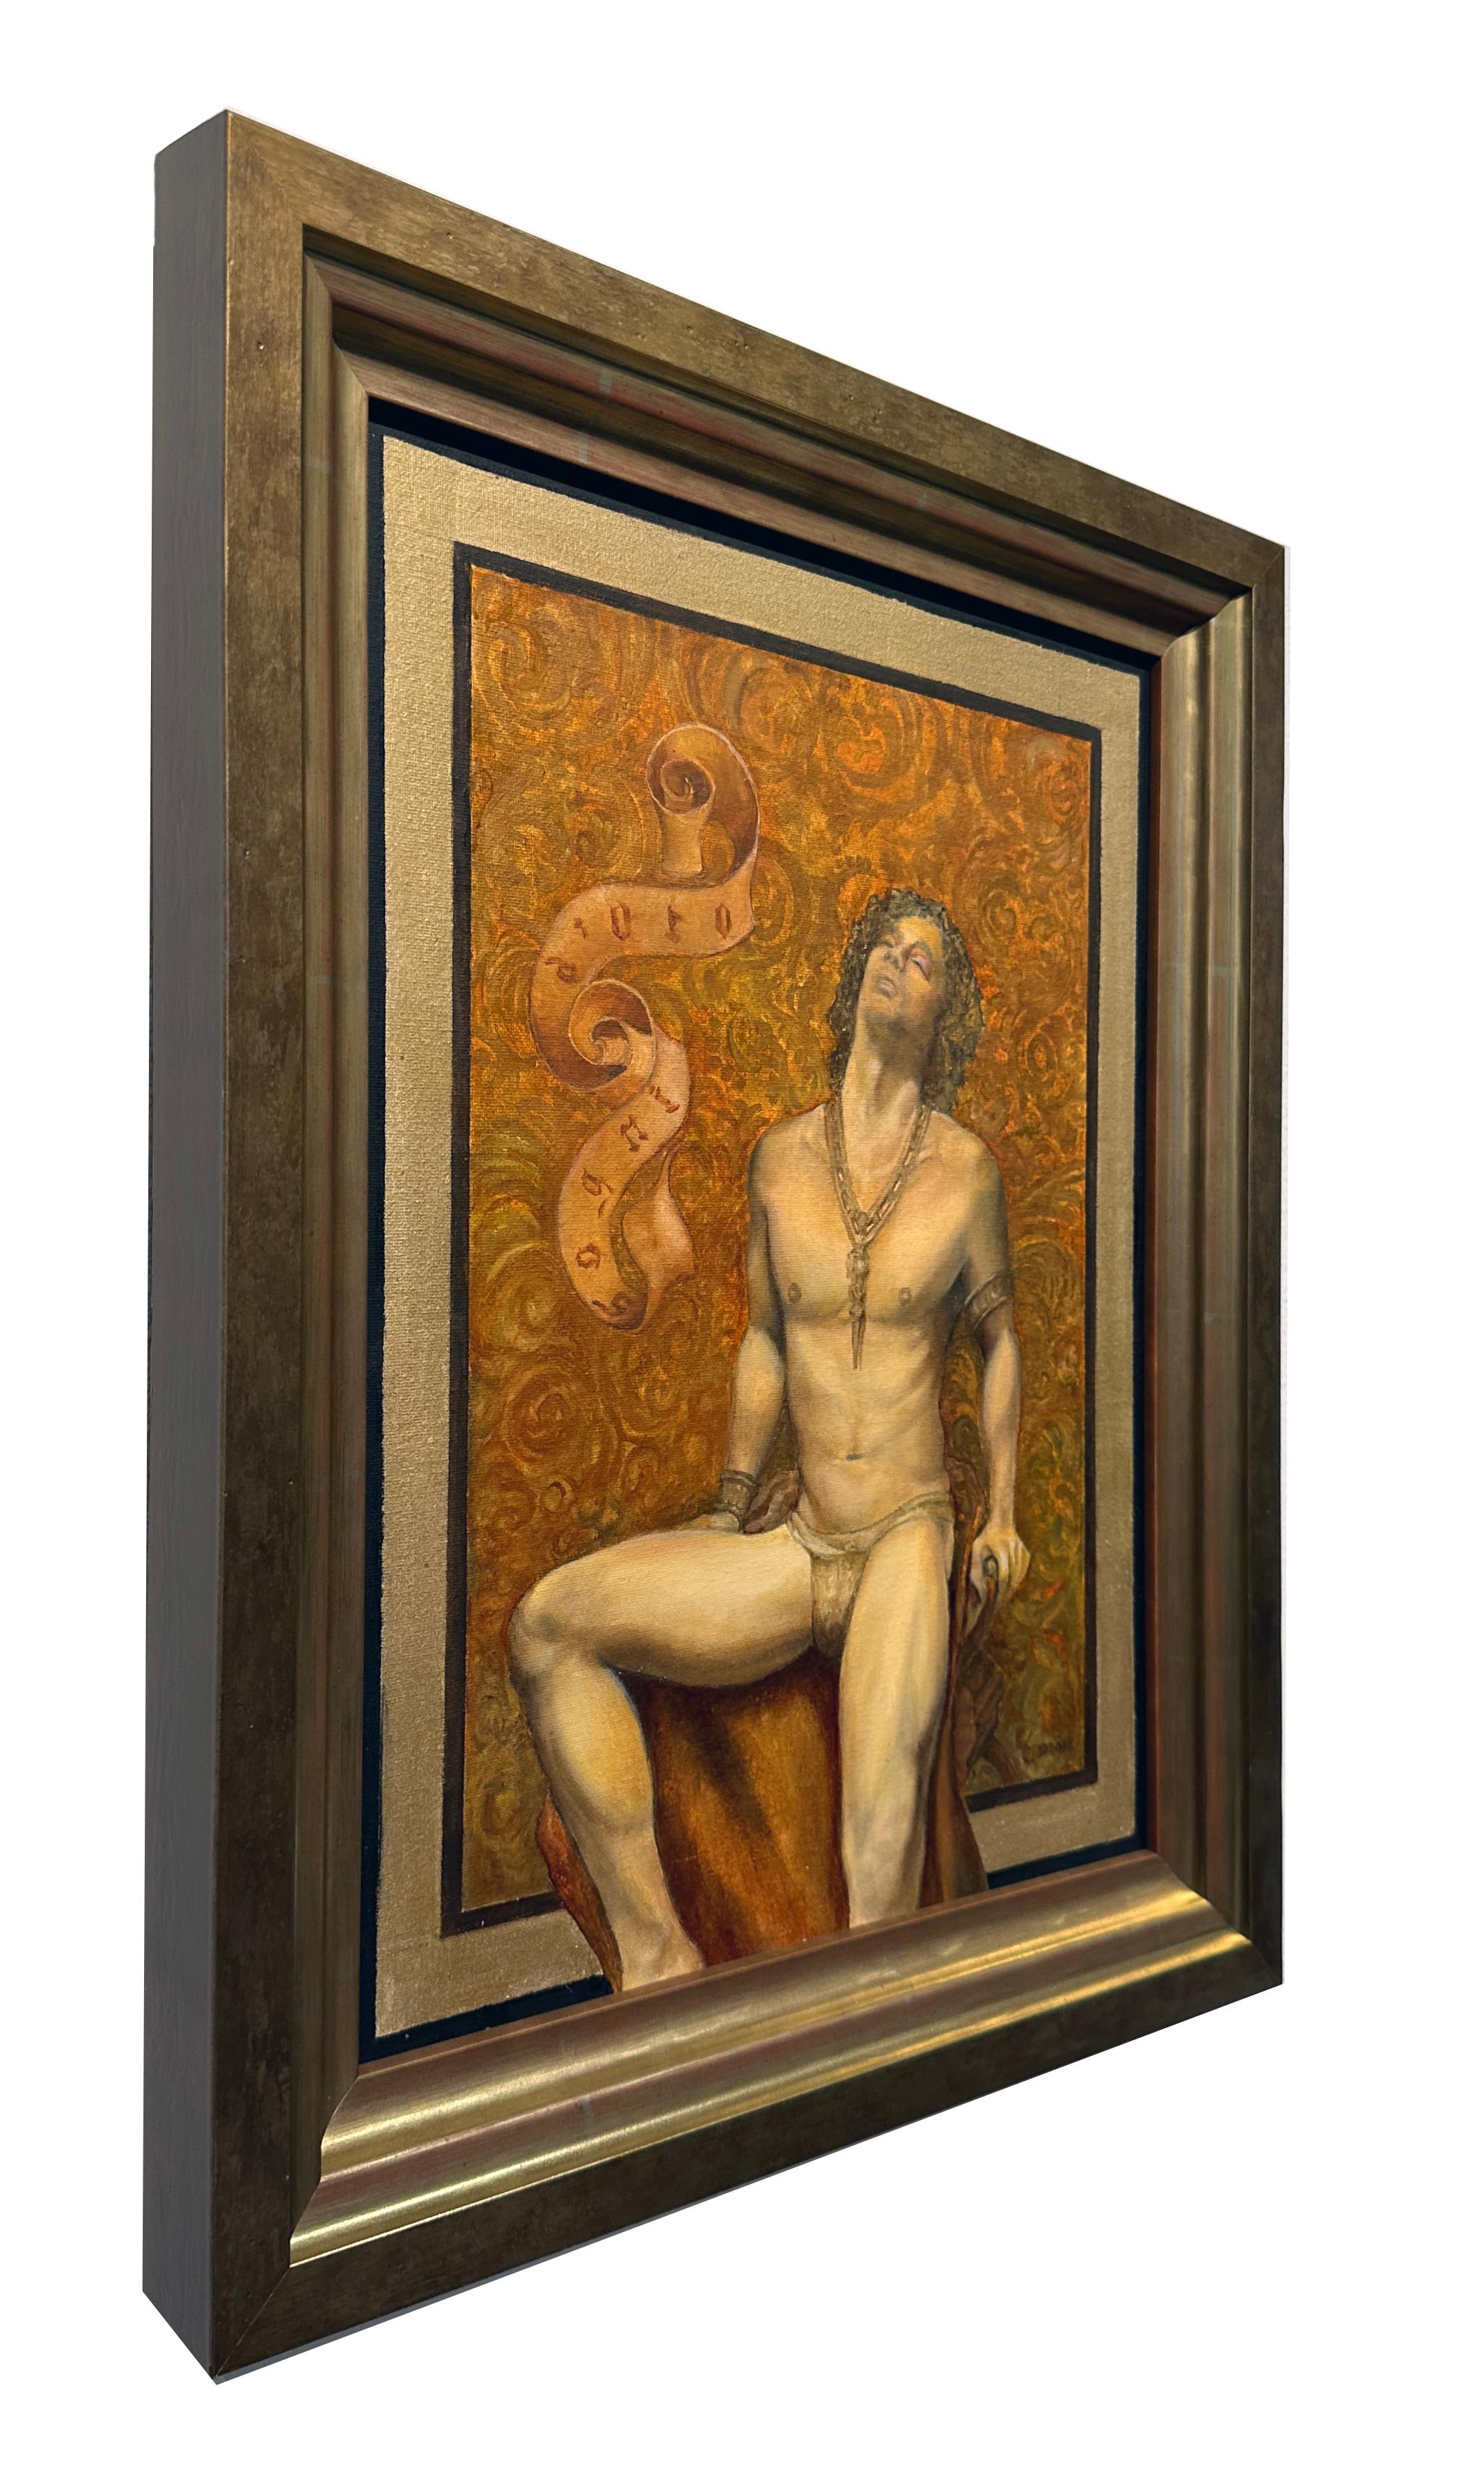 Sogno D'Oro - Seated Muscular Male Wearing a Loin Cloth, Original Oil on Canvas - Painting by Richard Gibbons